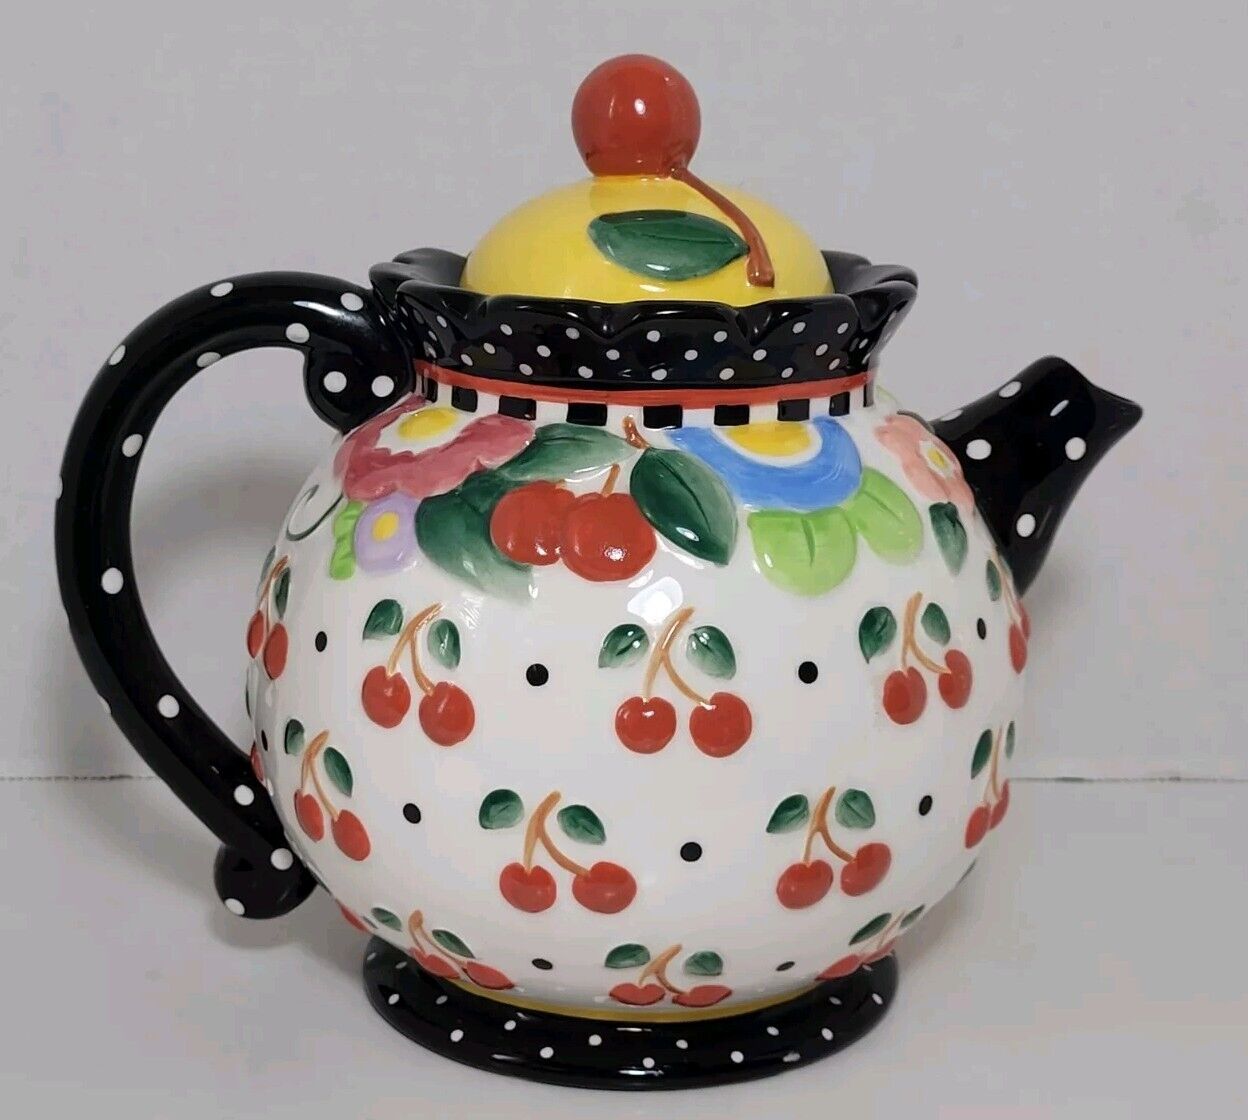 Mary Engelbreit OH SO BREIT Cherries Teapot 2000 Collectible Cherry Whimsical